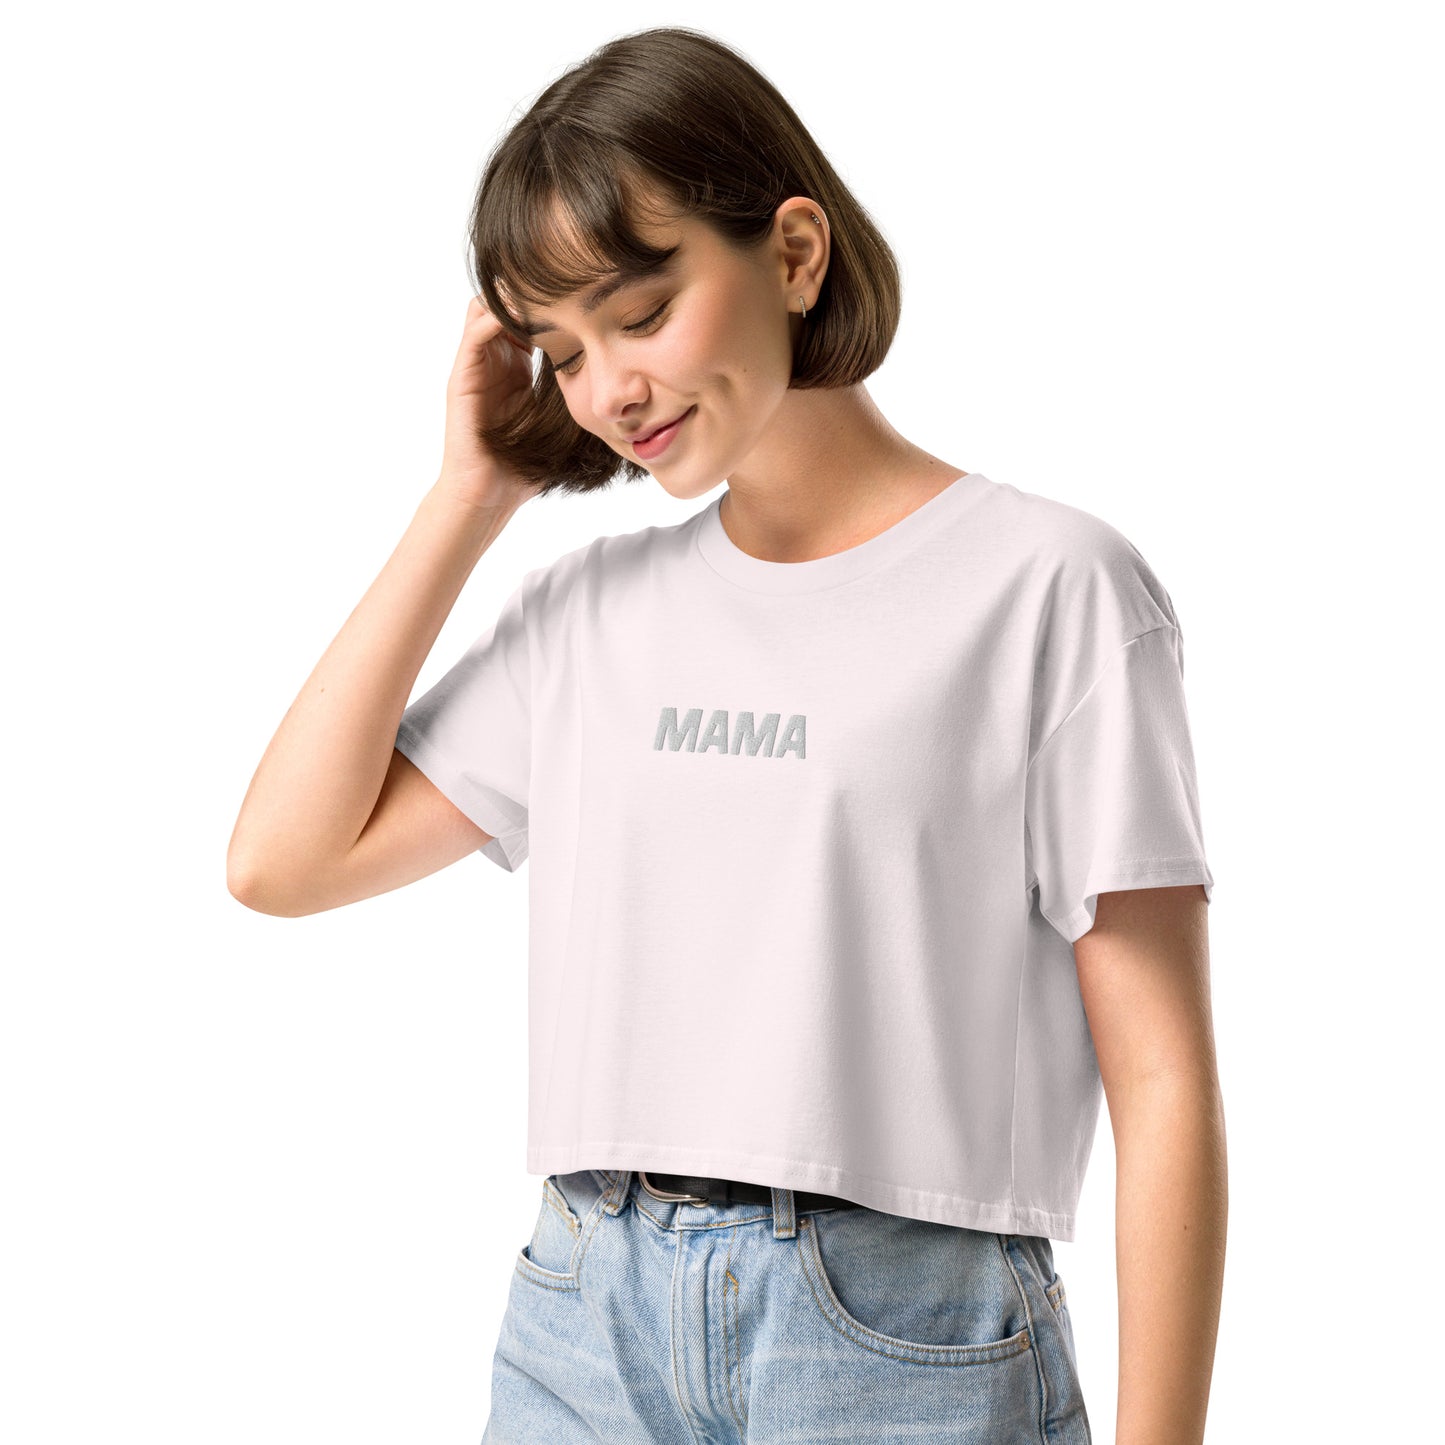 "MAMA" EMBROIDERED CROP TOP